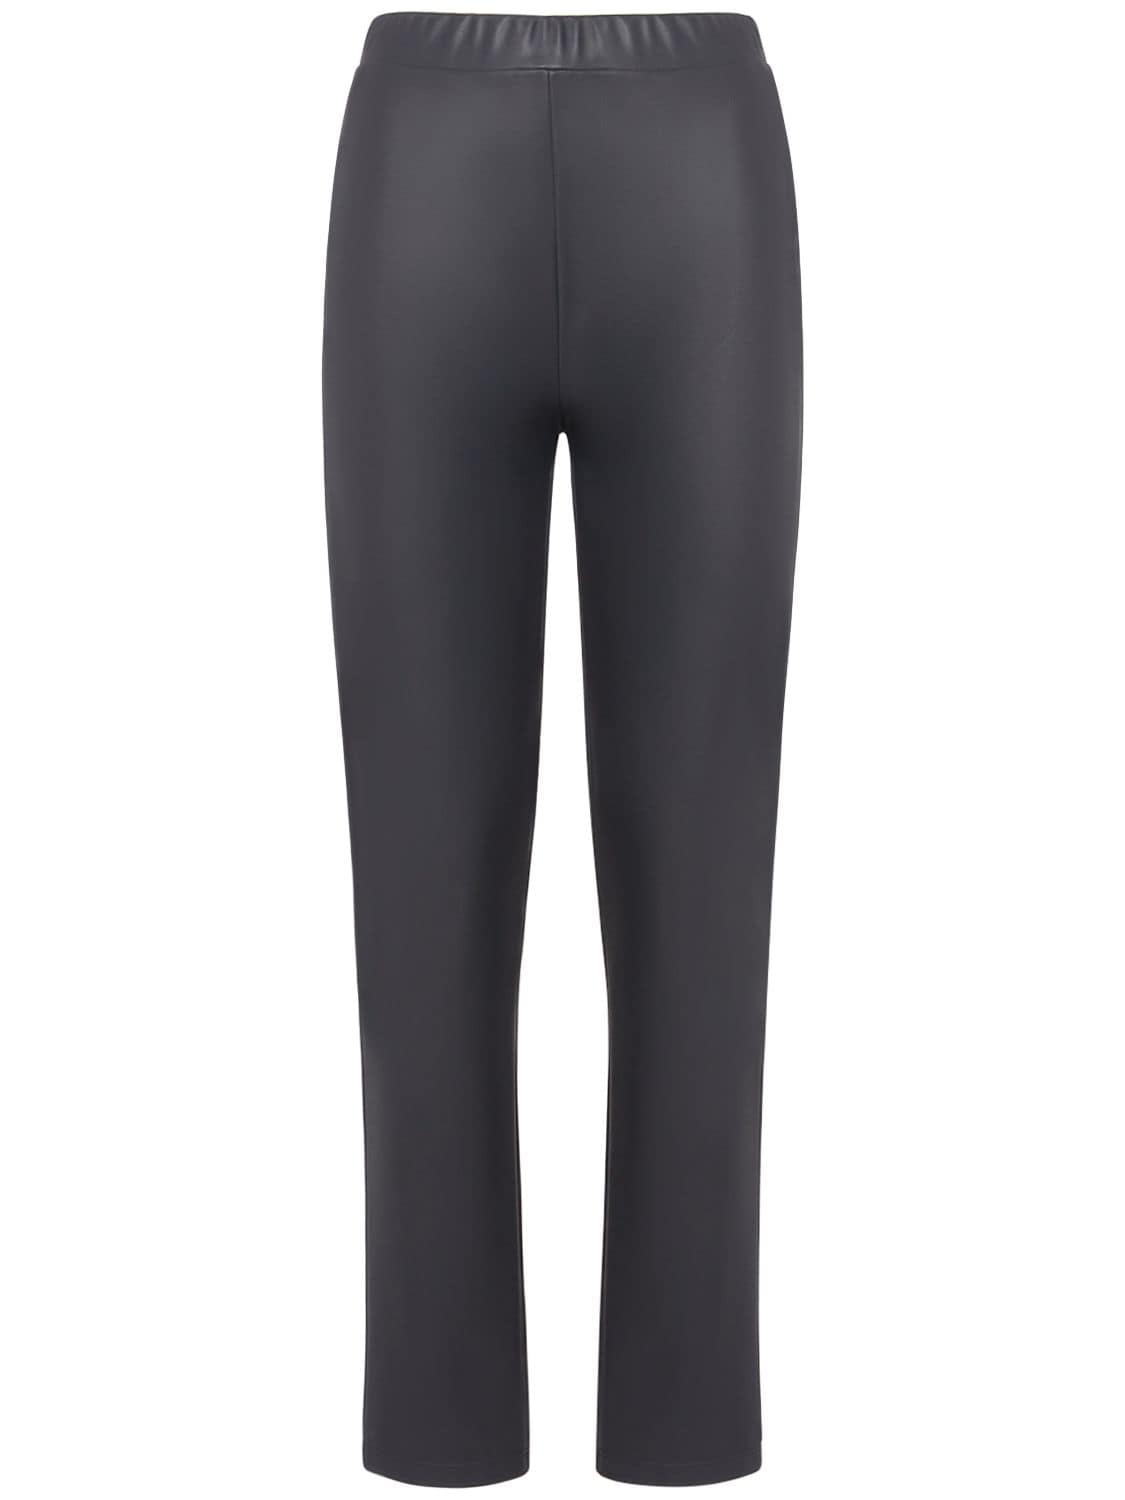 Image of Zefir Faux Leather Leggings